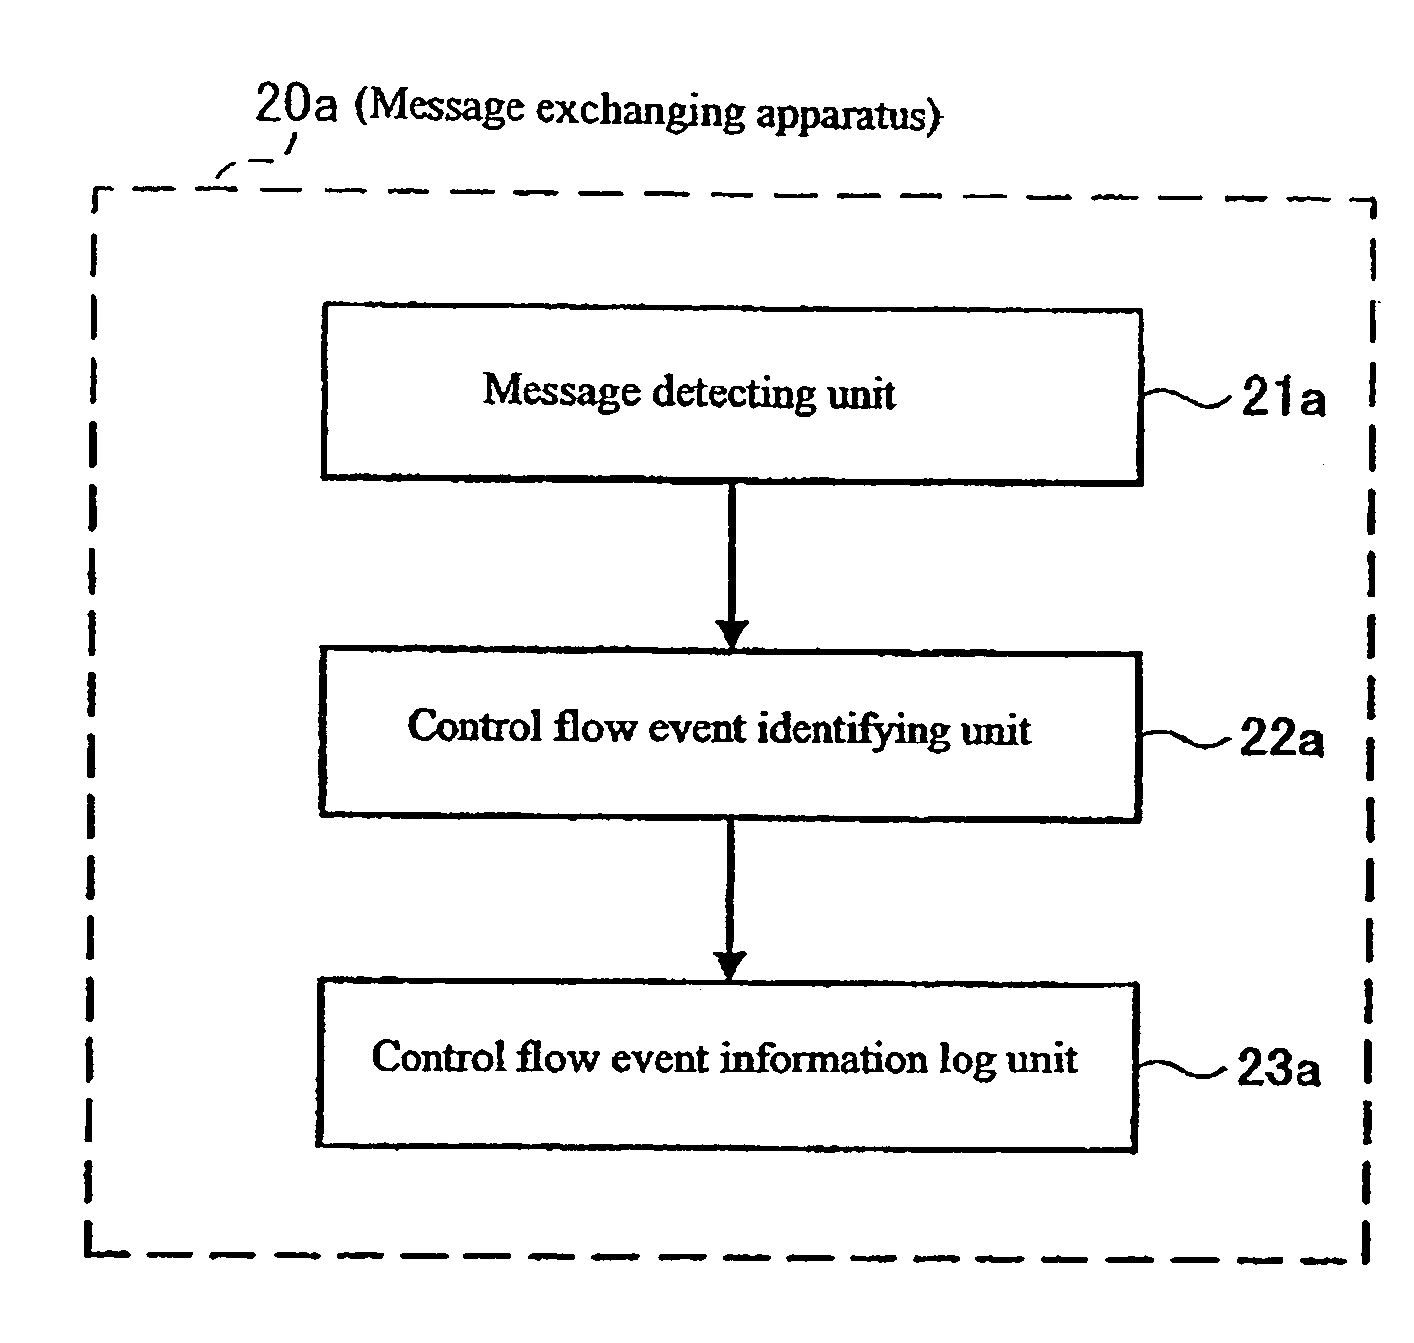 Activity monitoring without accessing a process object